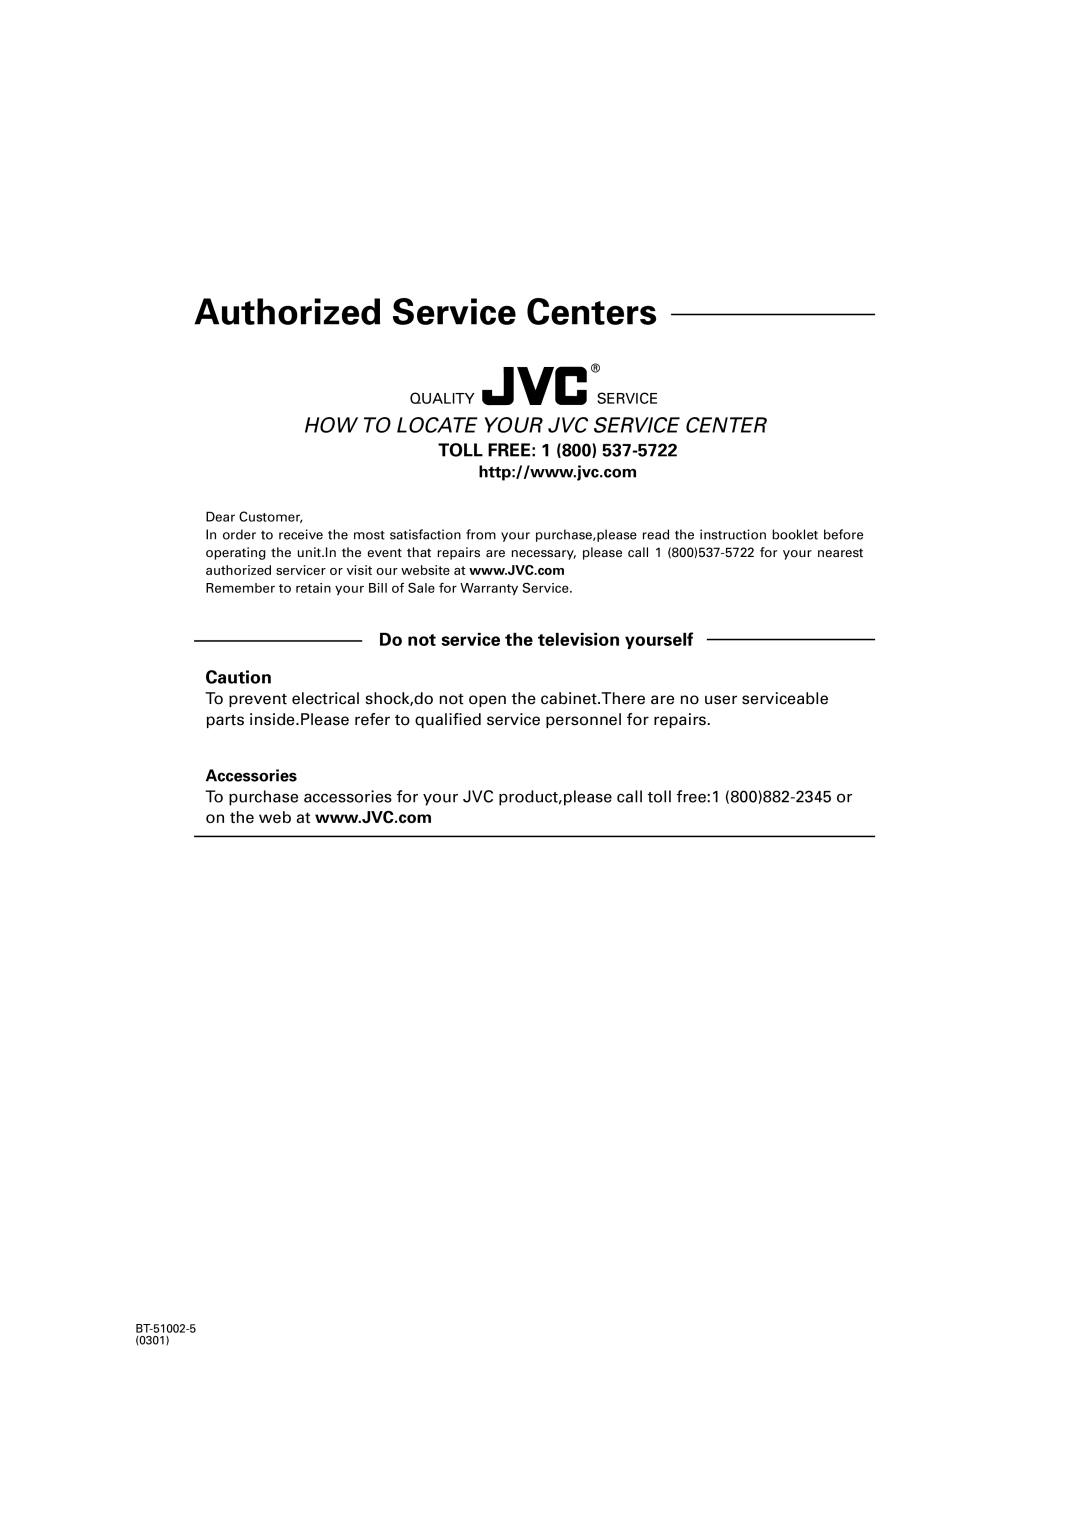 JVC MX-GT700 manual TOLL FREE: 1 800, Do not service the television yourself, Authorized Service Centers, Accessories 